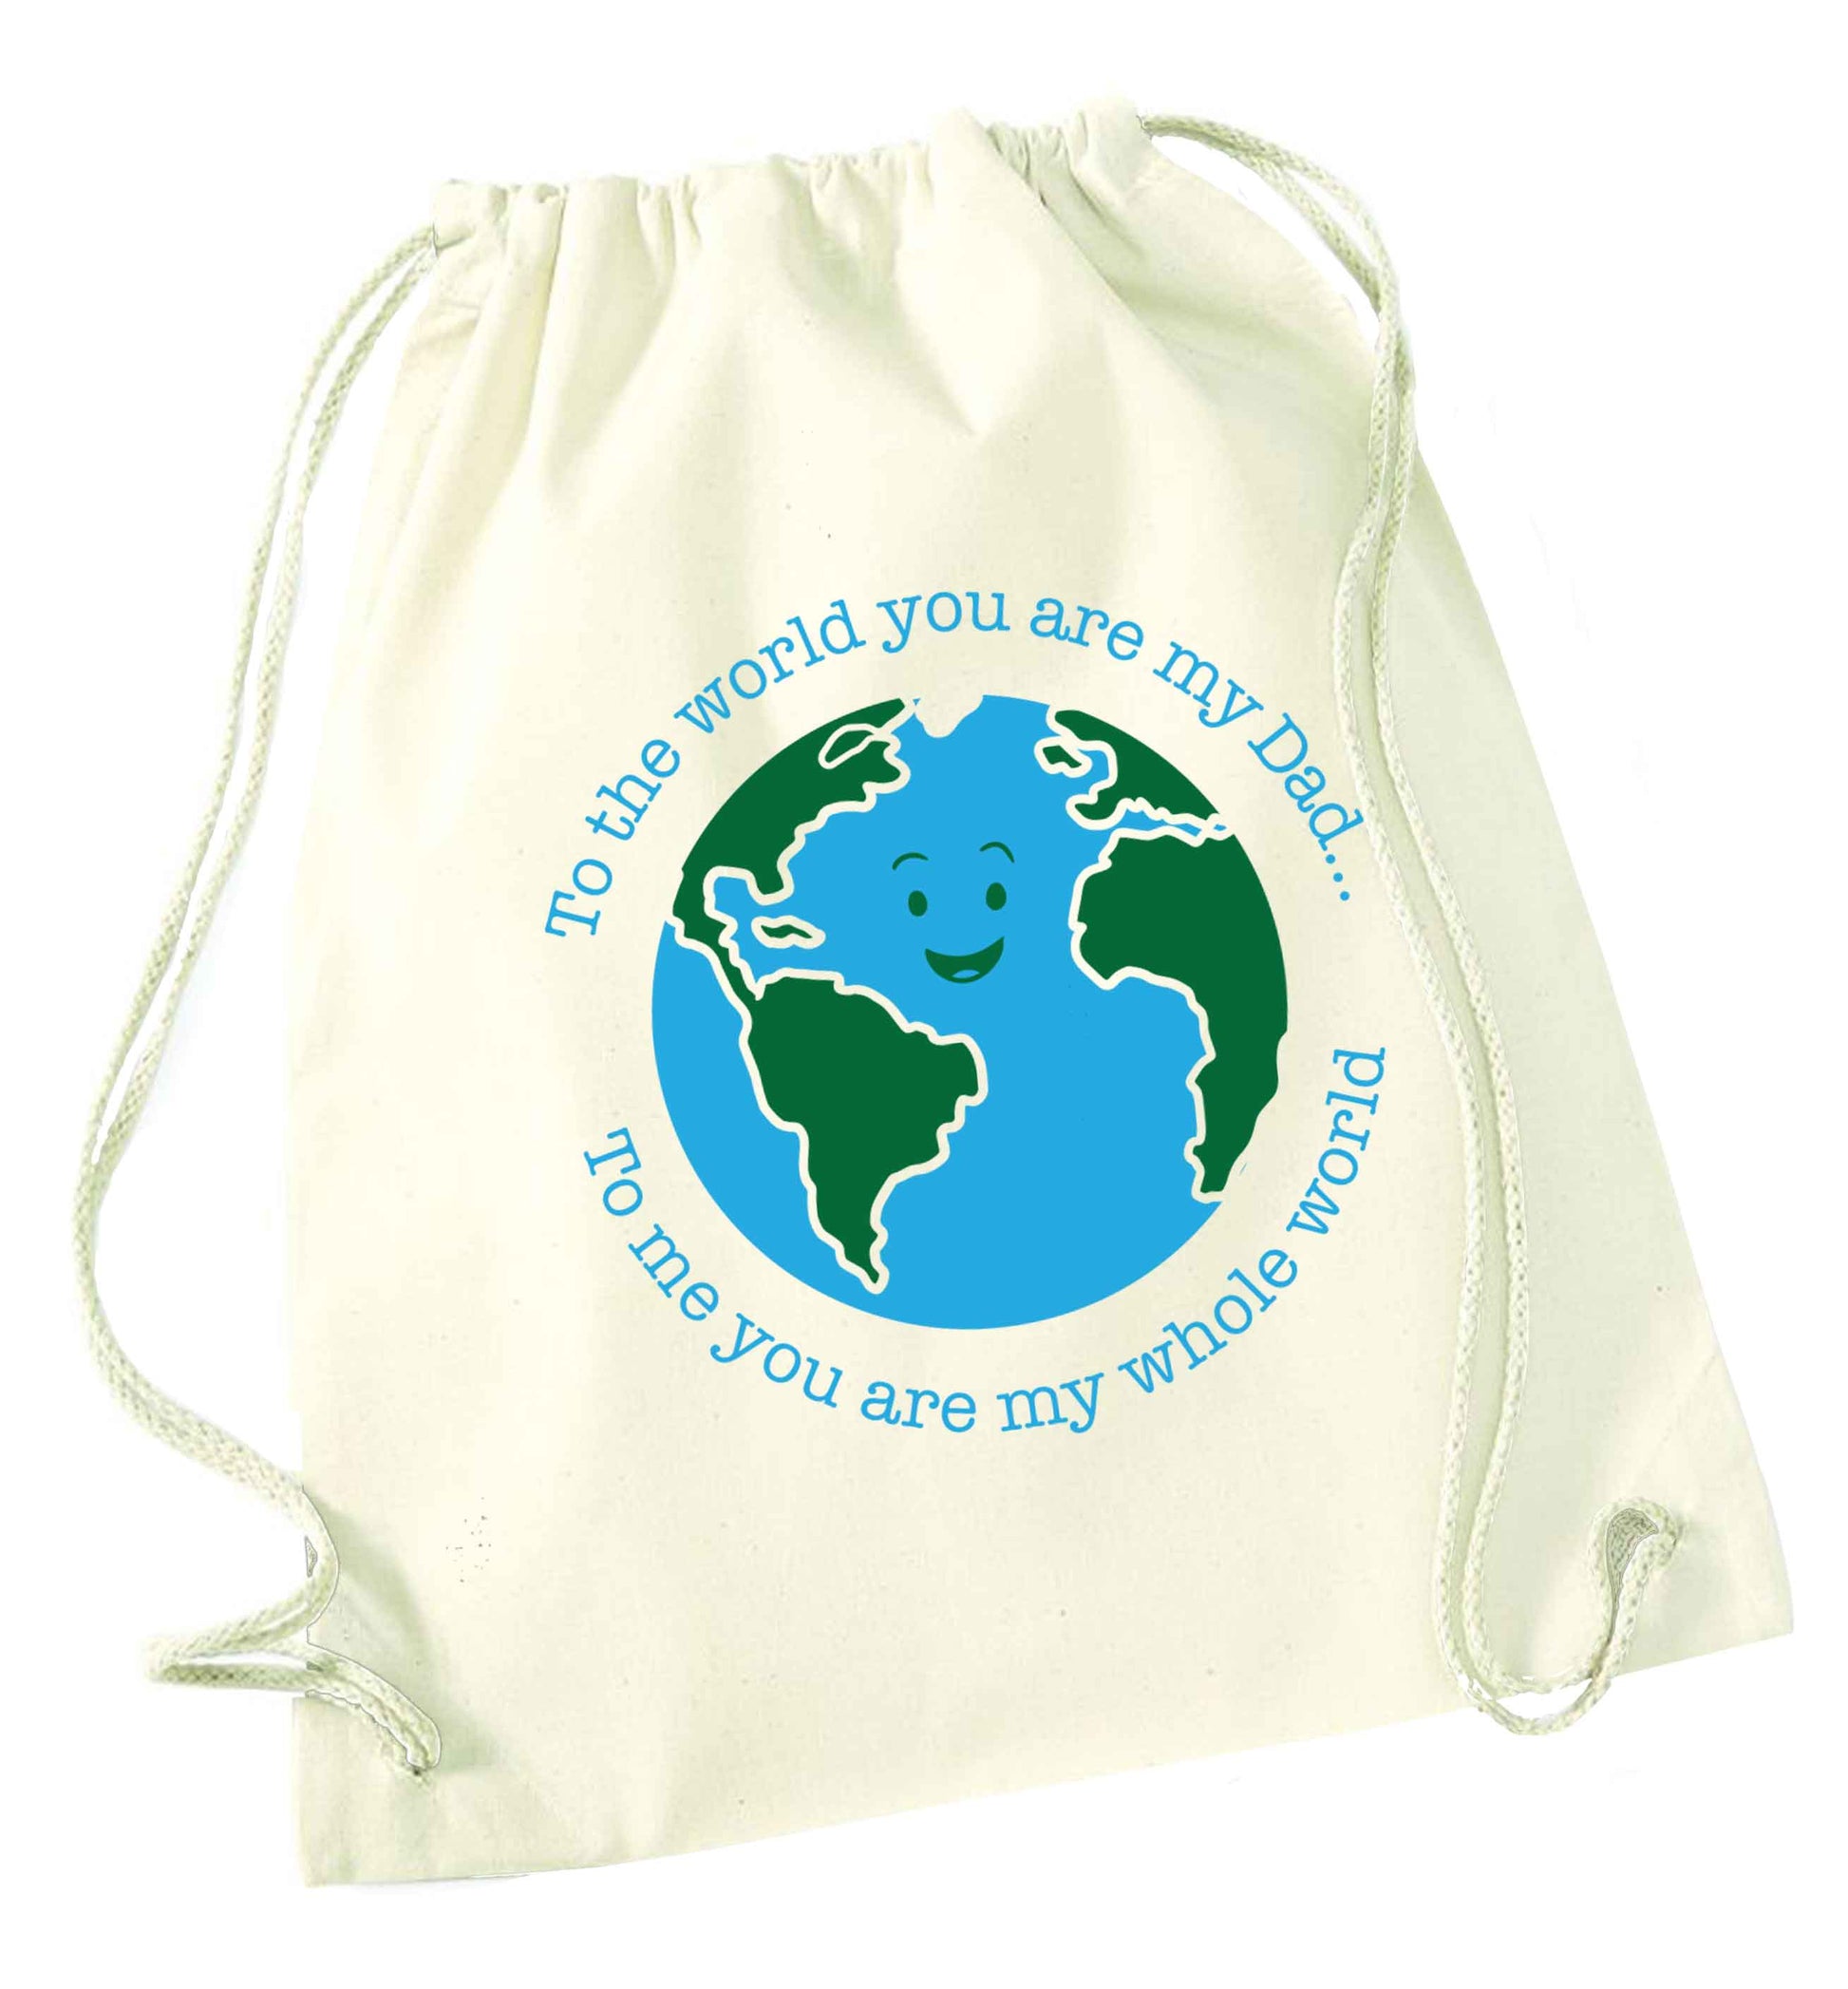 To the world you are my dad, to me you are my whole world natural drawstring bag